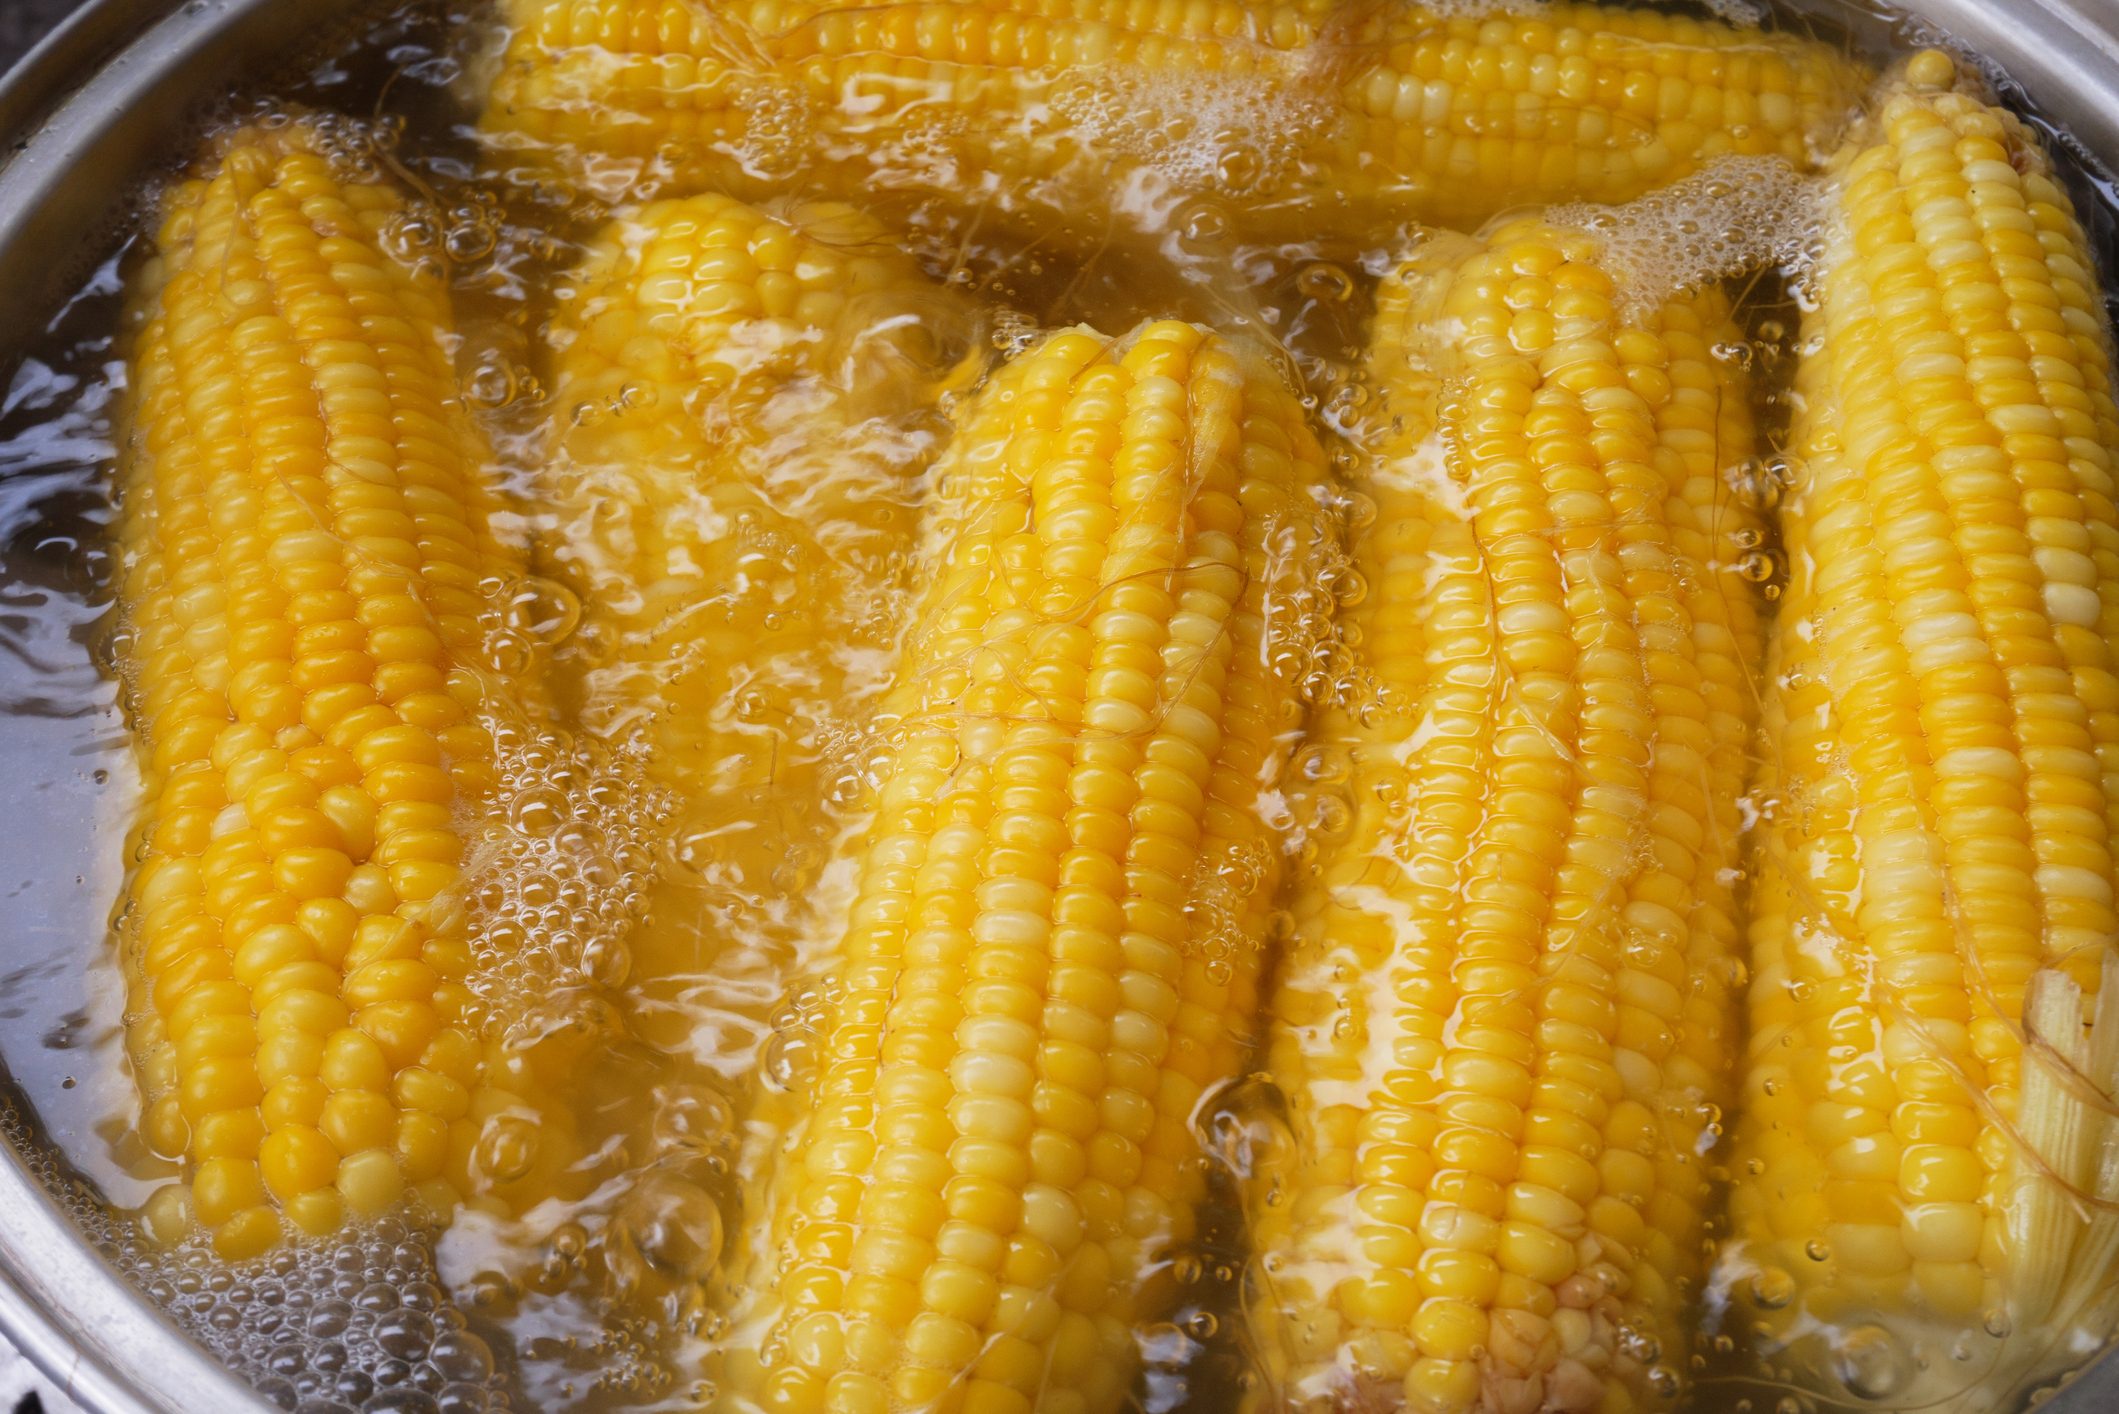 Yellow corn is boiled in a pot